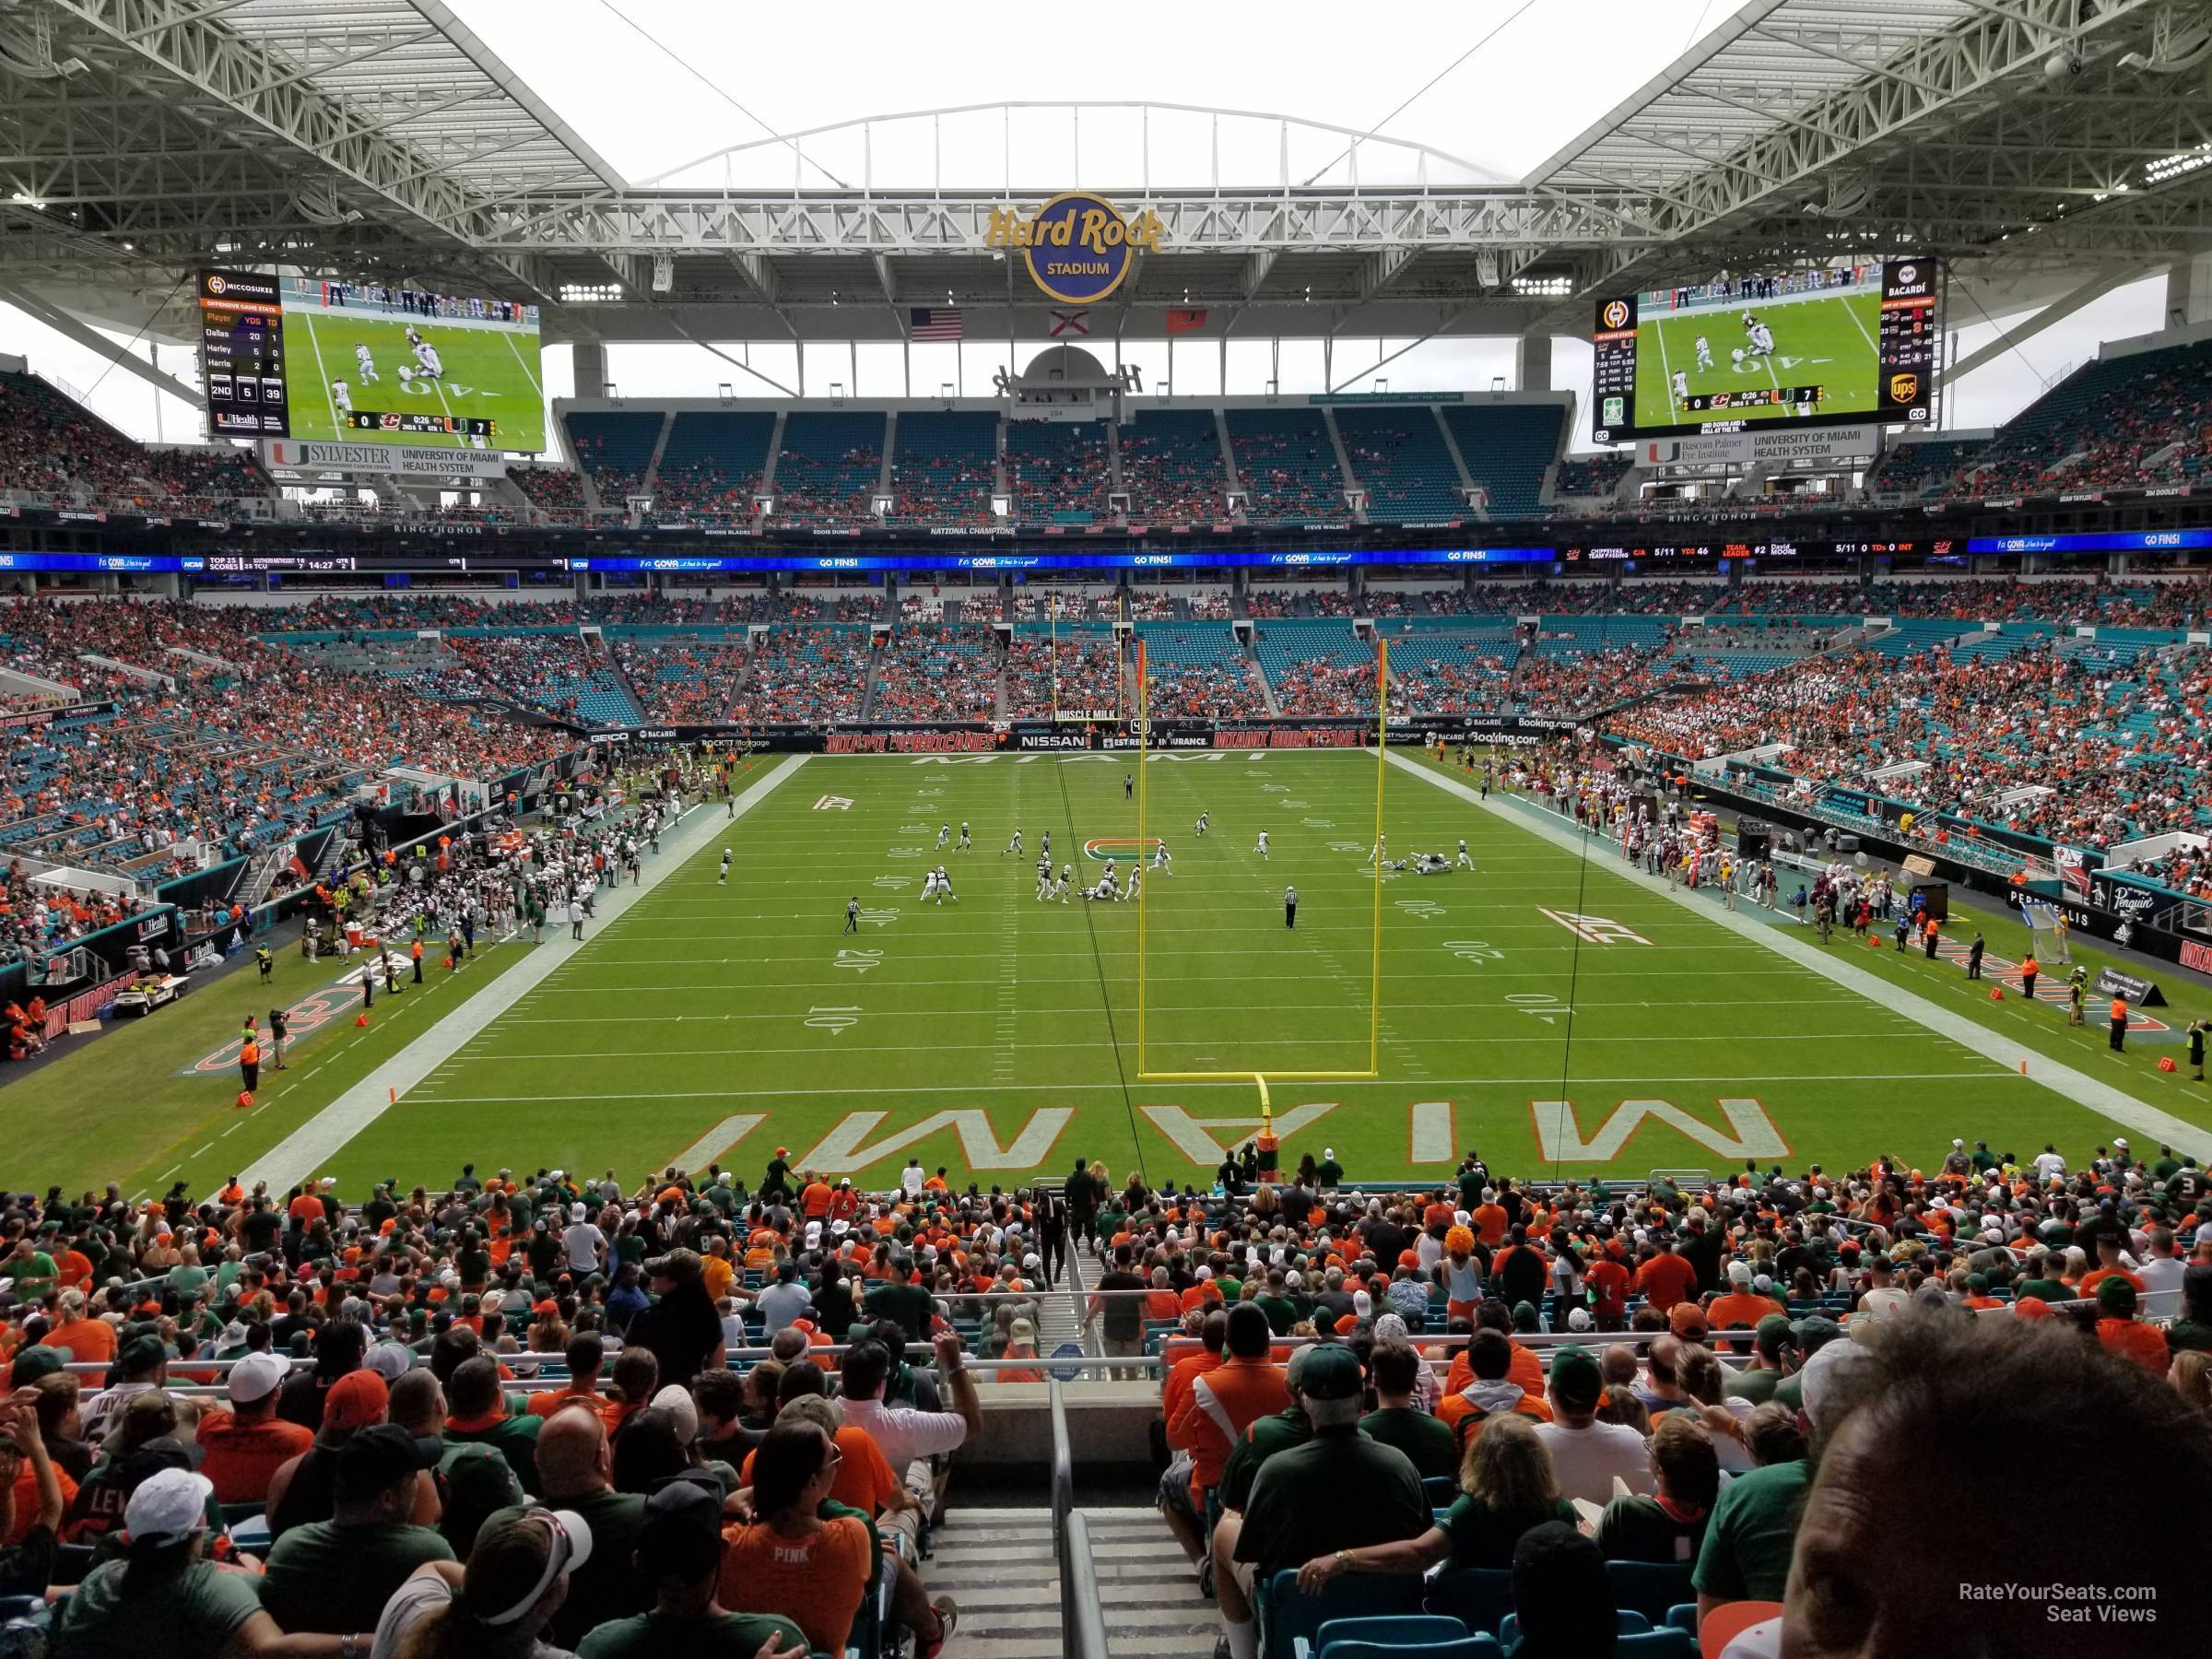 section 233, row 10 seat view  for football - hard rock stadium